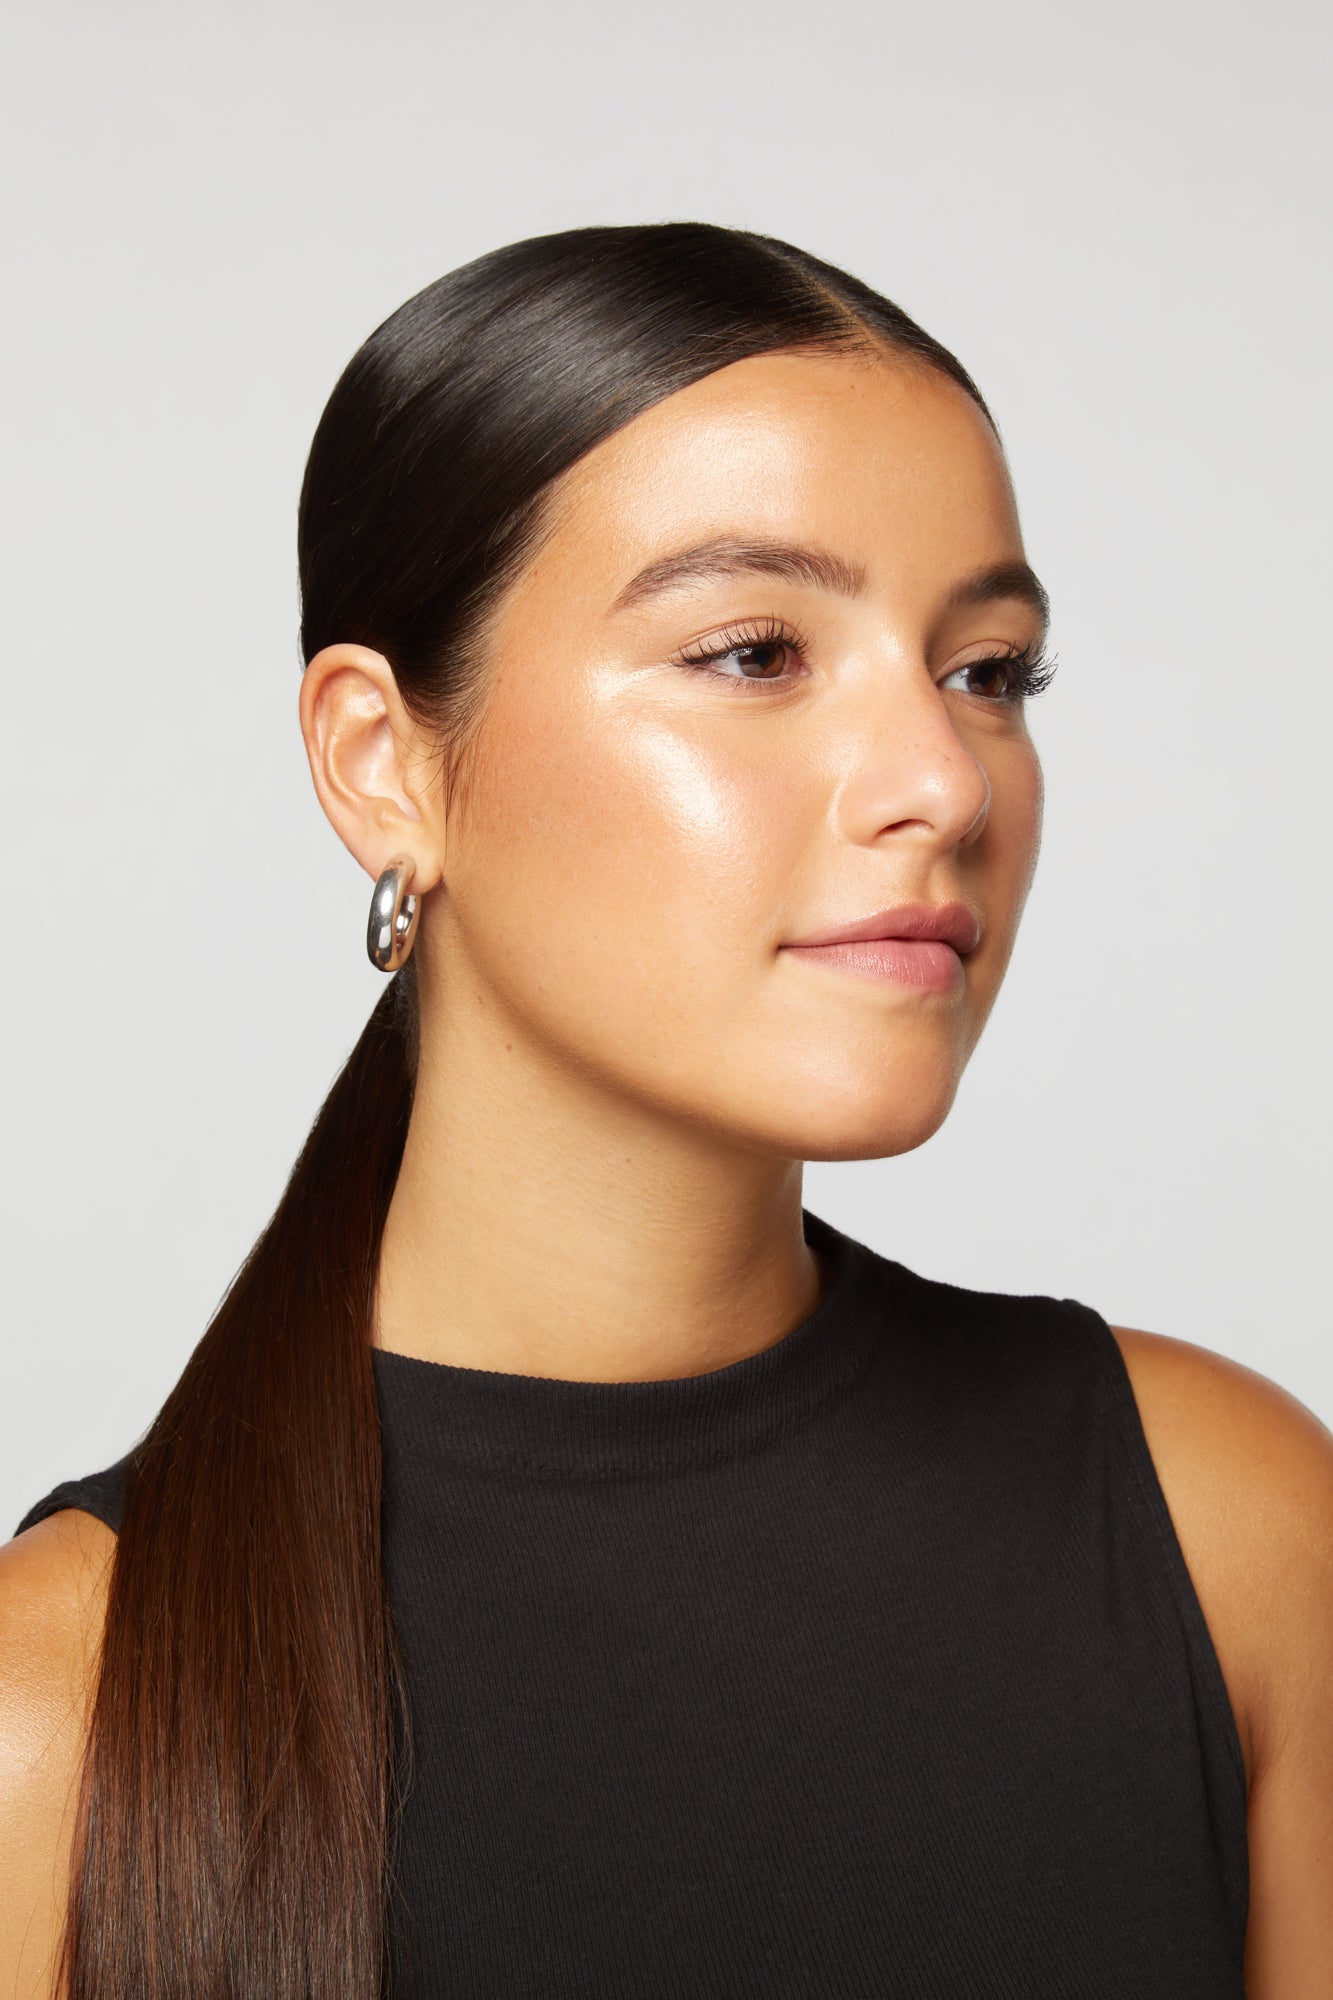 example make up on a model with medium light skin- Lite Gold